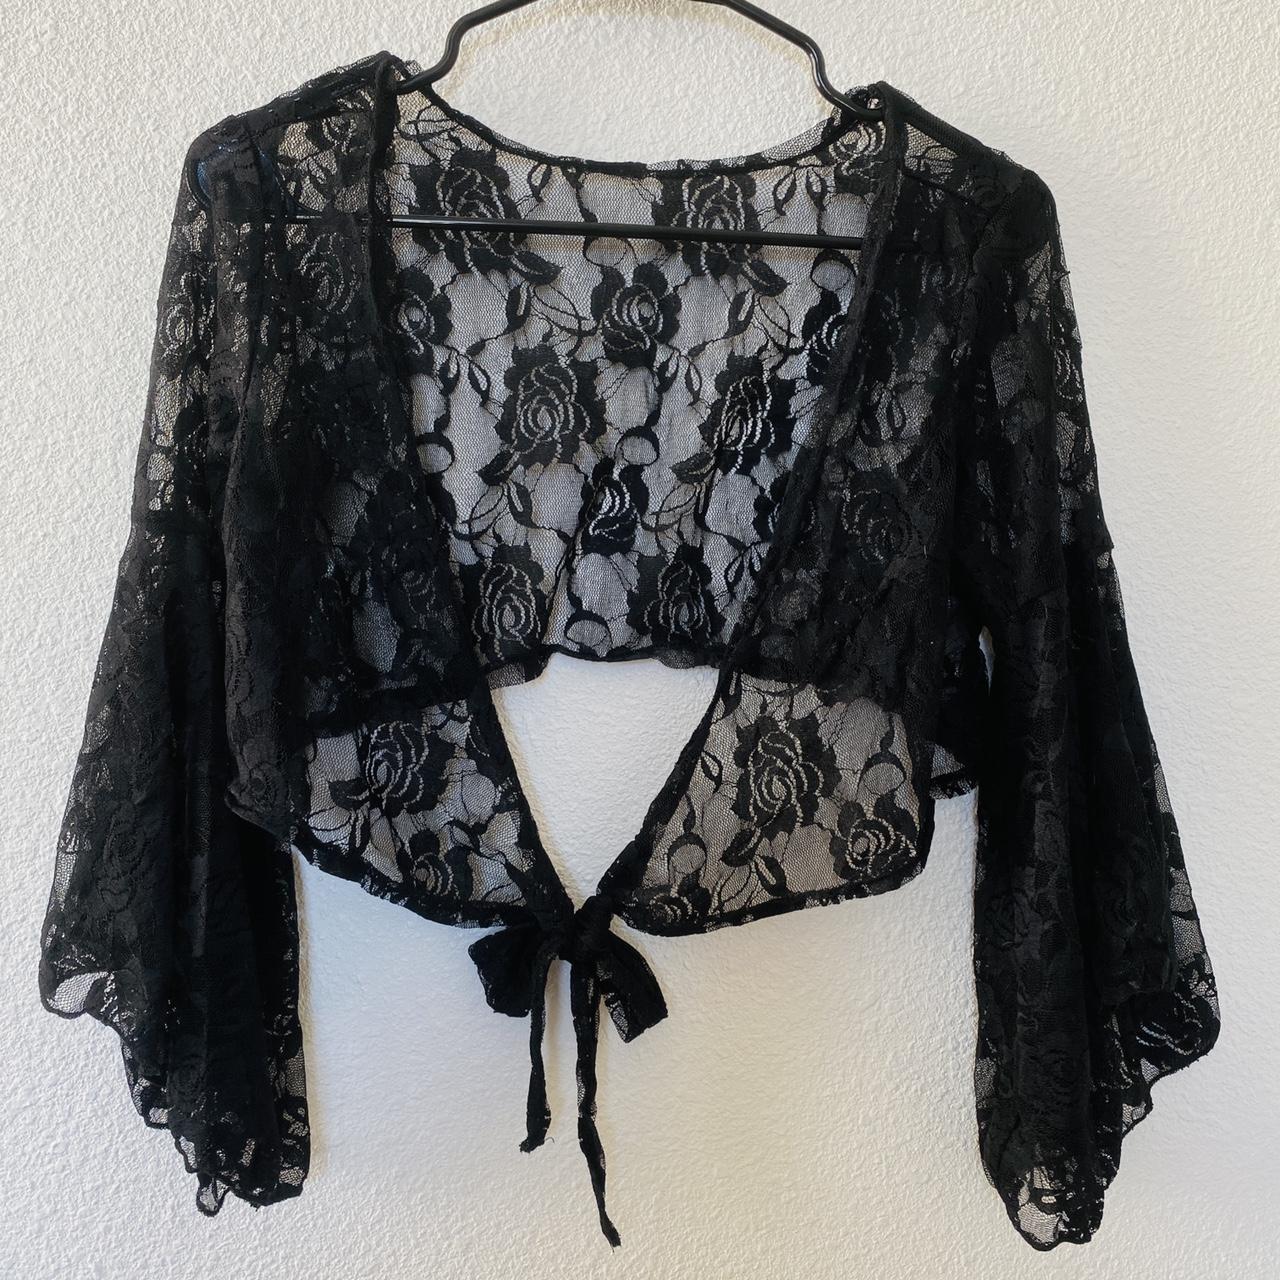 Lace cropped cover up. - Depop